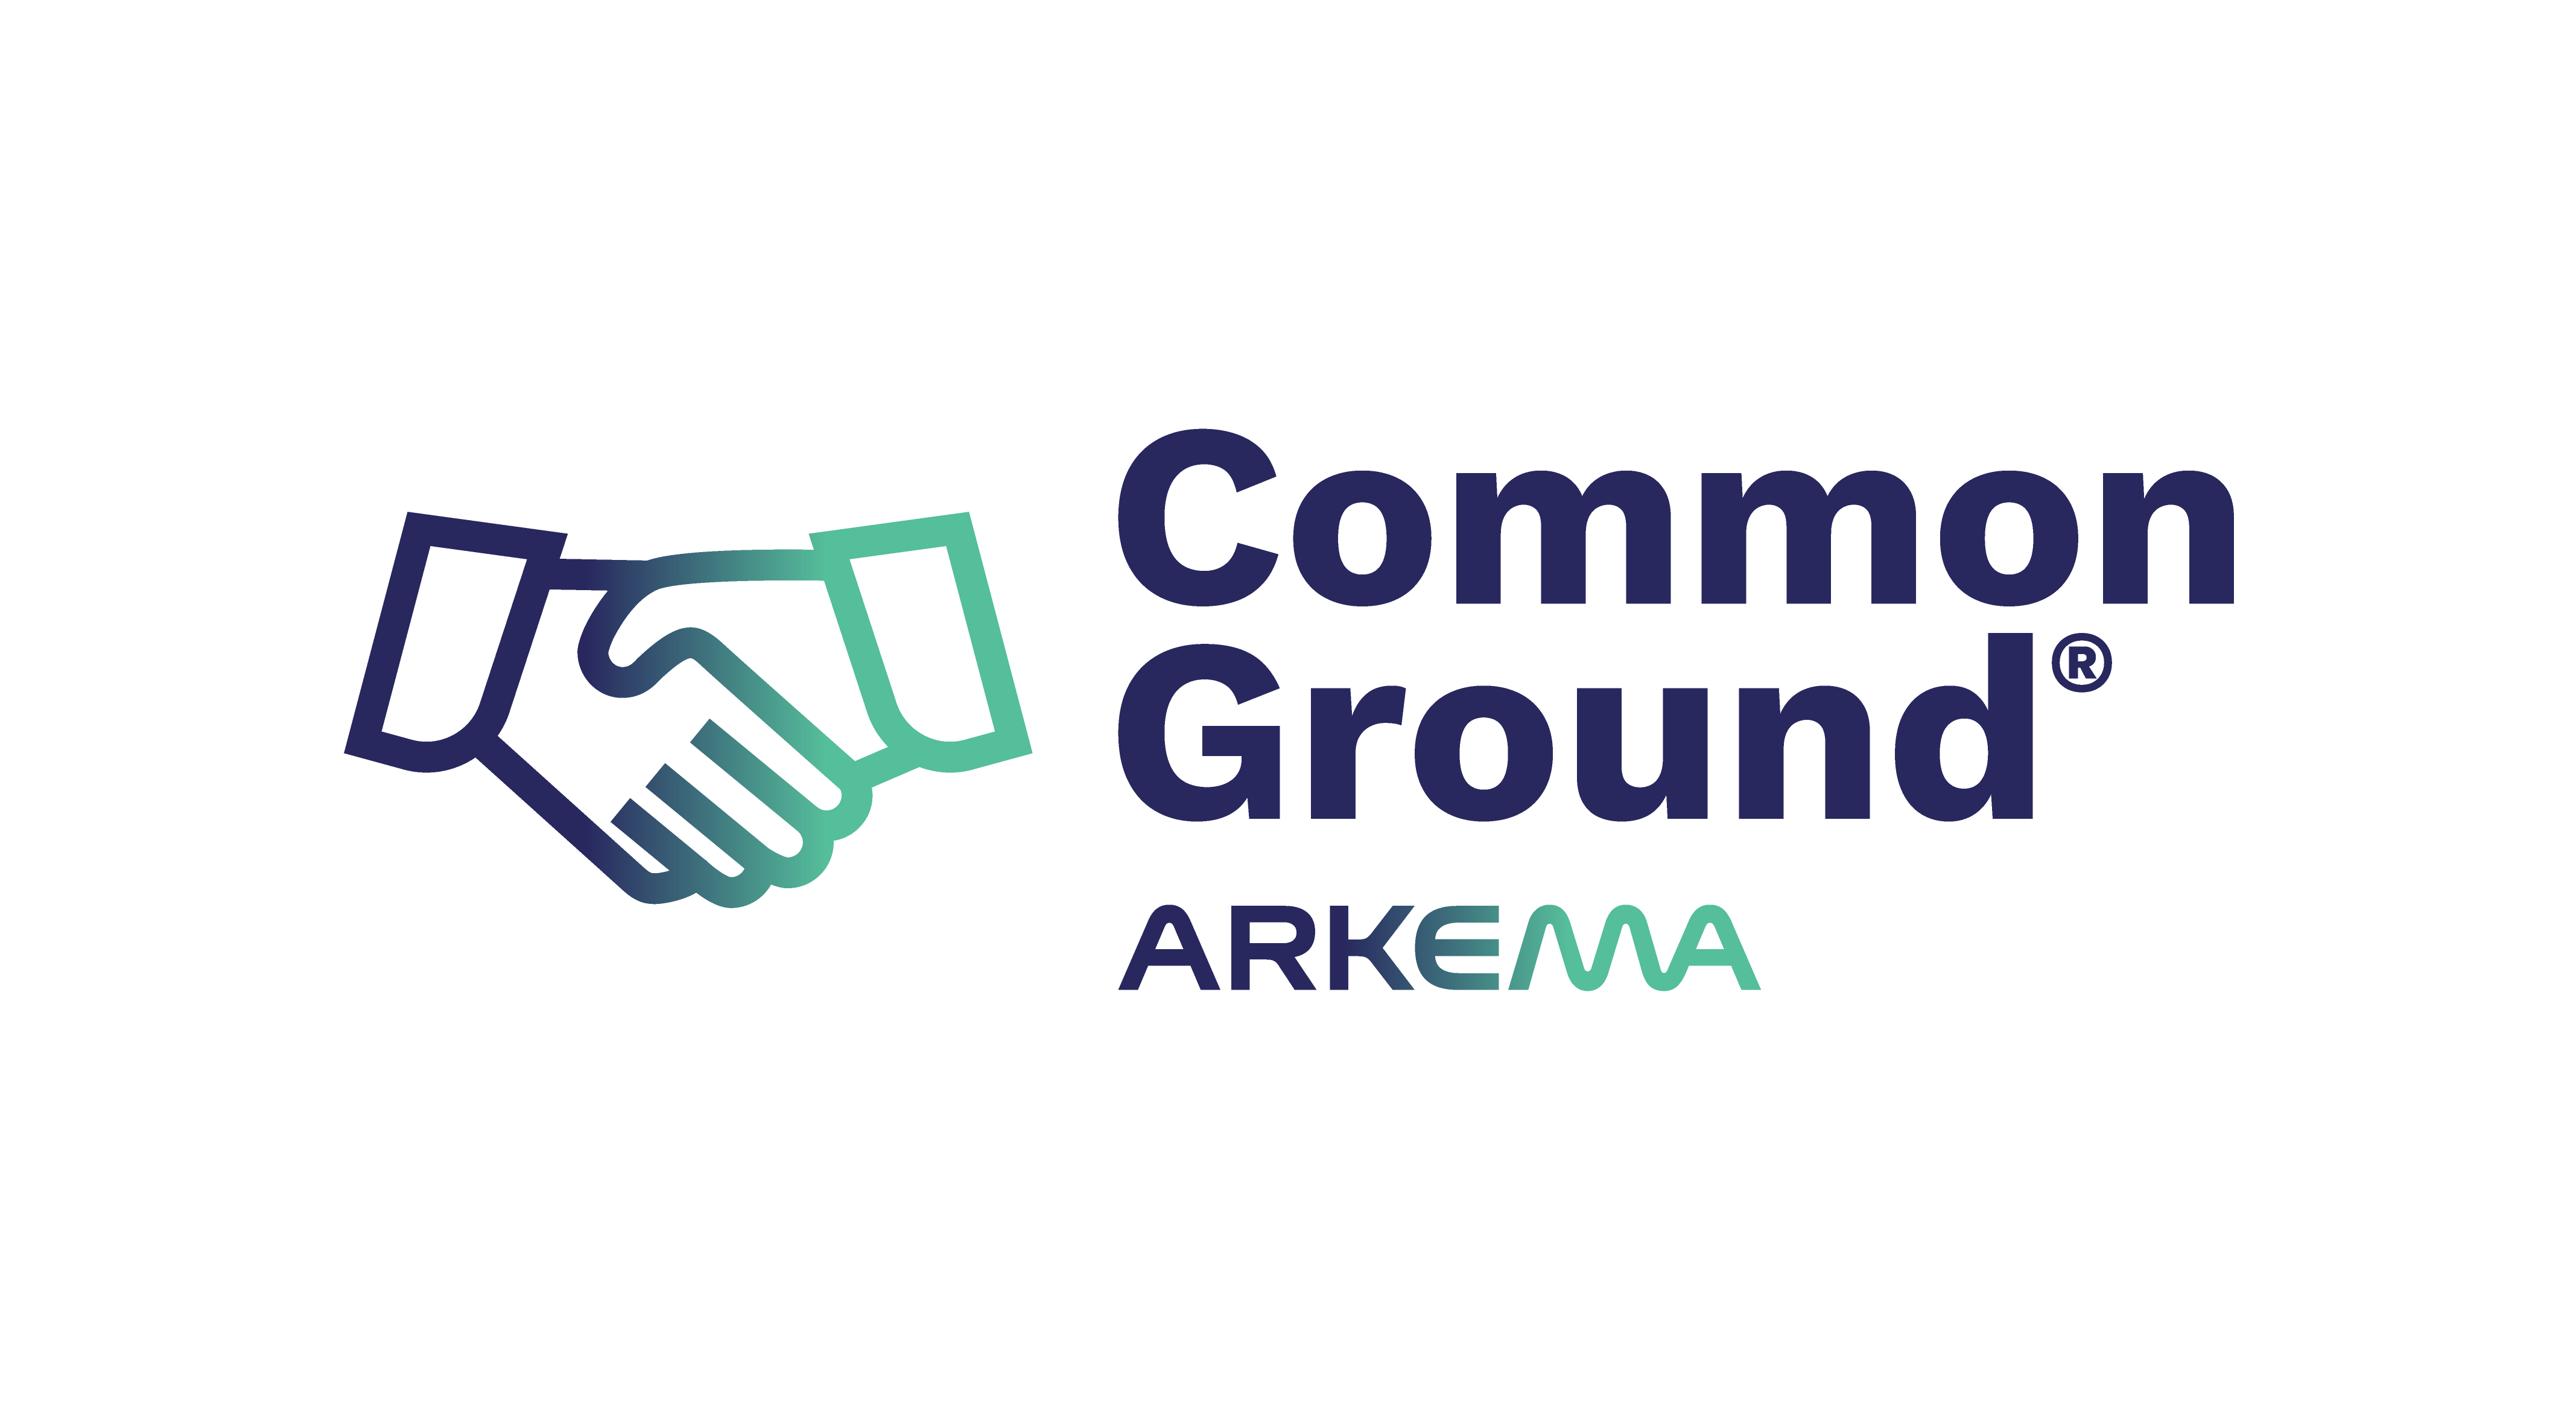 logo-common-ground.png_1644223205.png